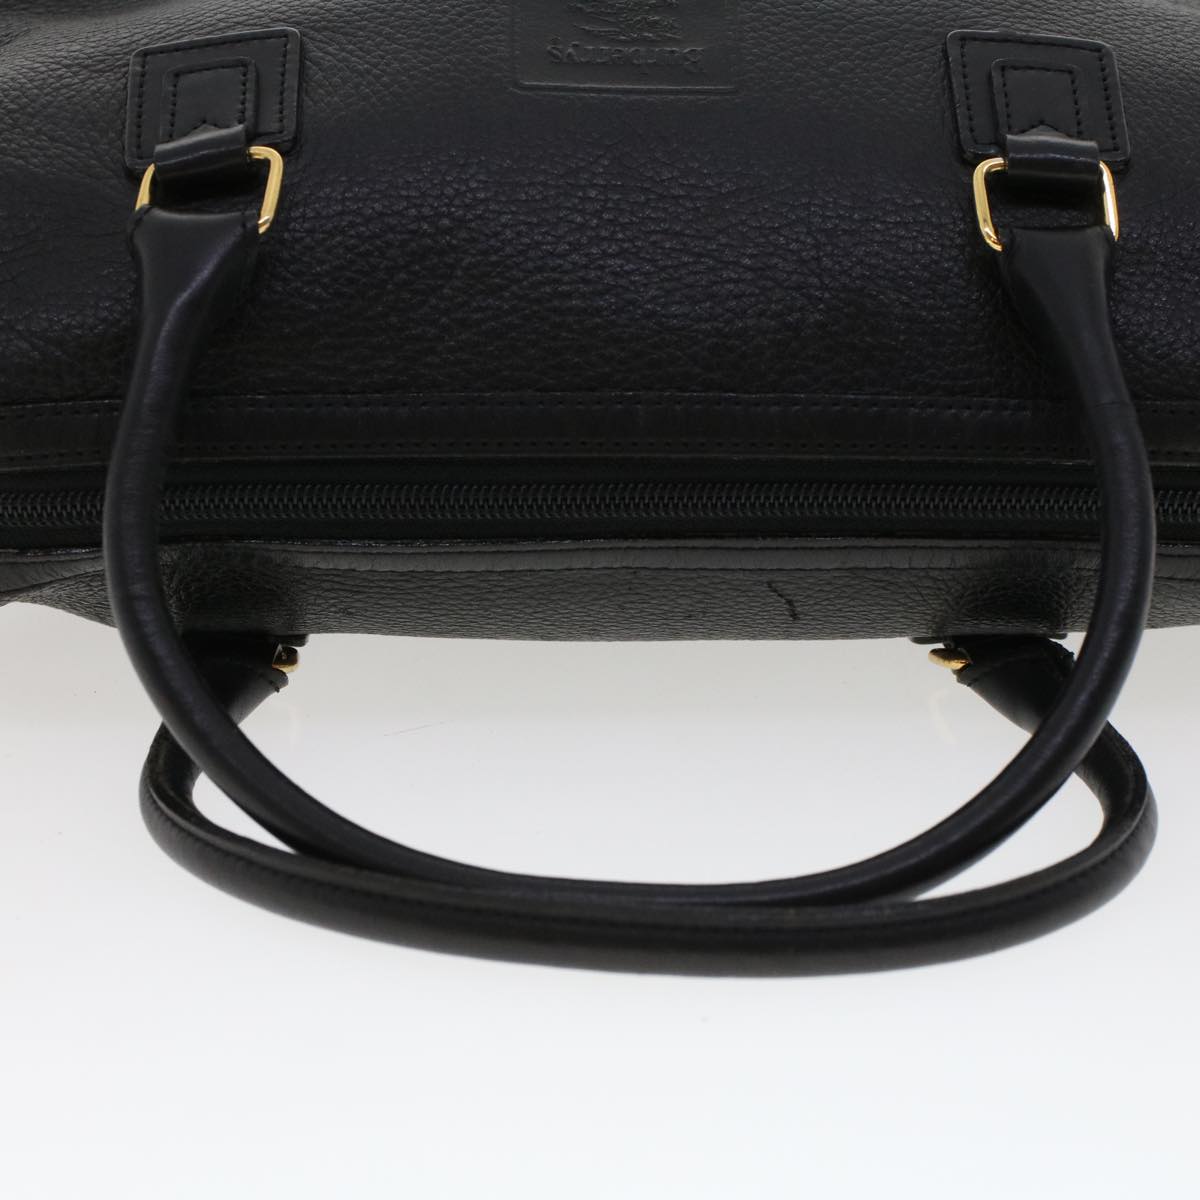 Burberrys Hand Bag Leather Black Auth bs5874